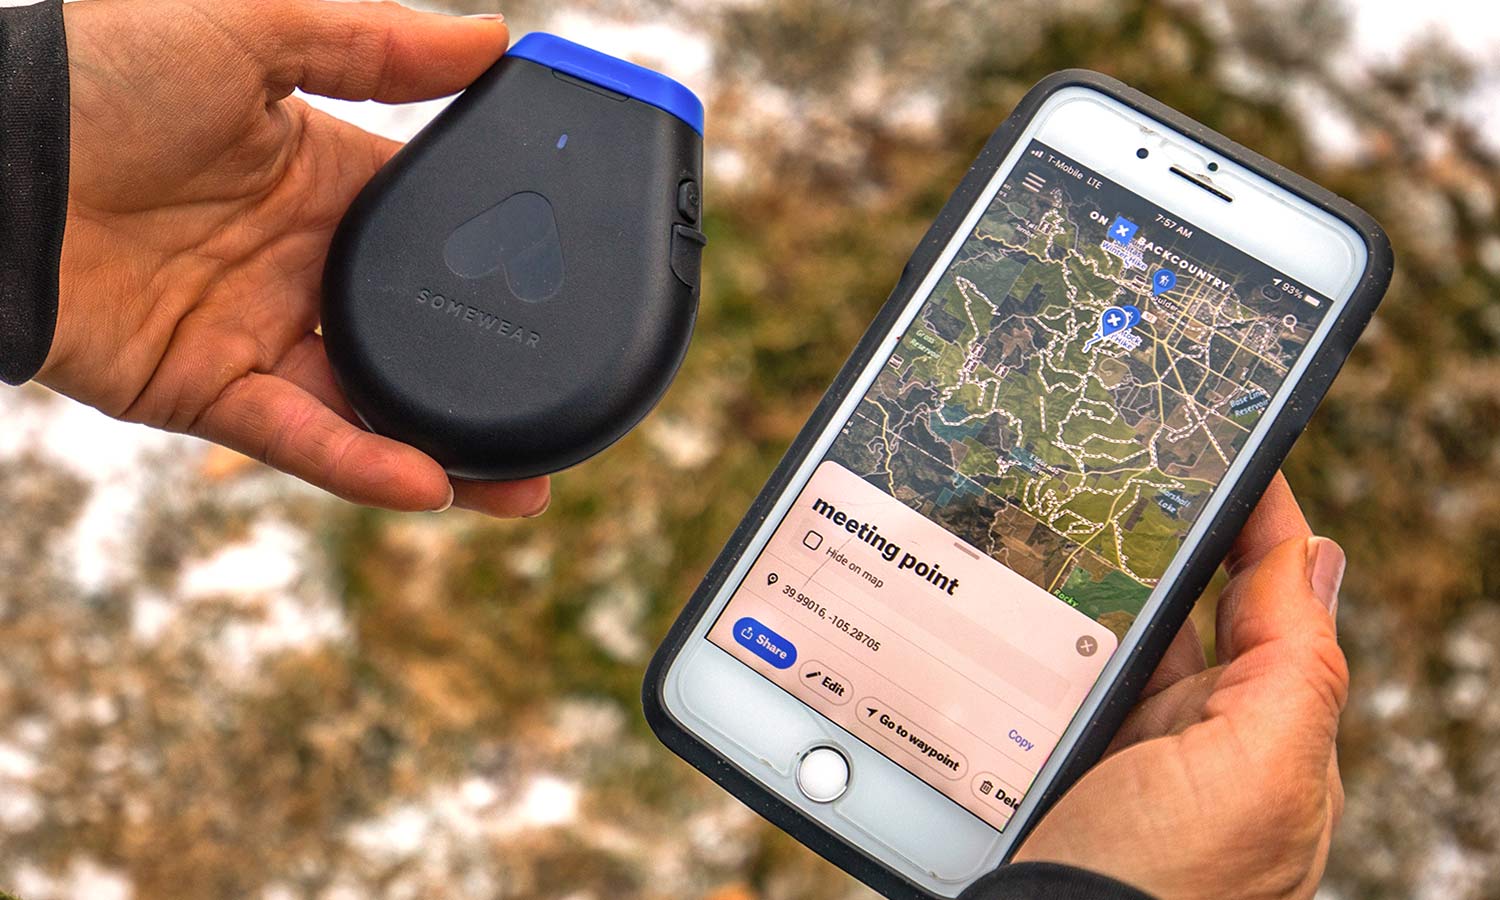 Somewear Global Hotspot satellite tracker get lower pricing more functionality